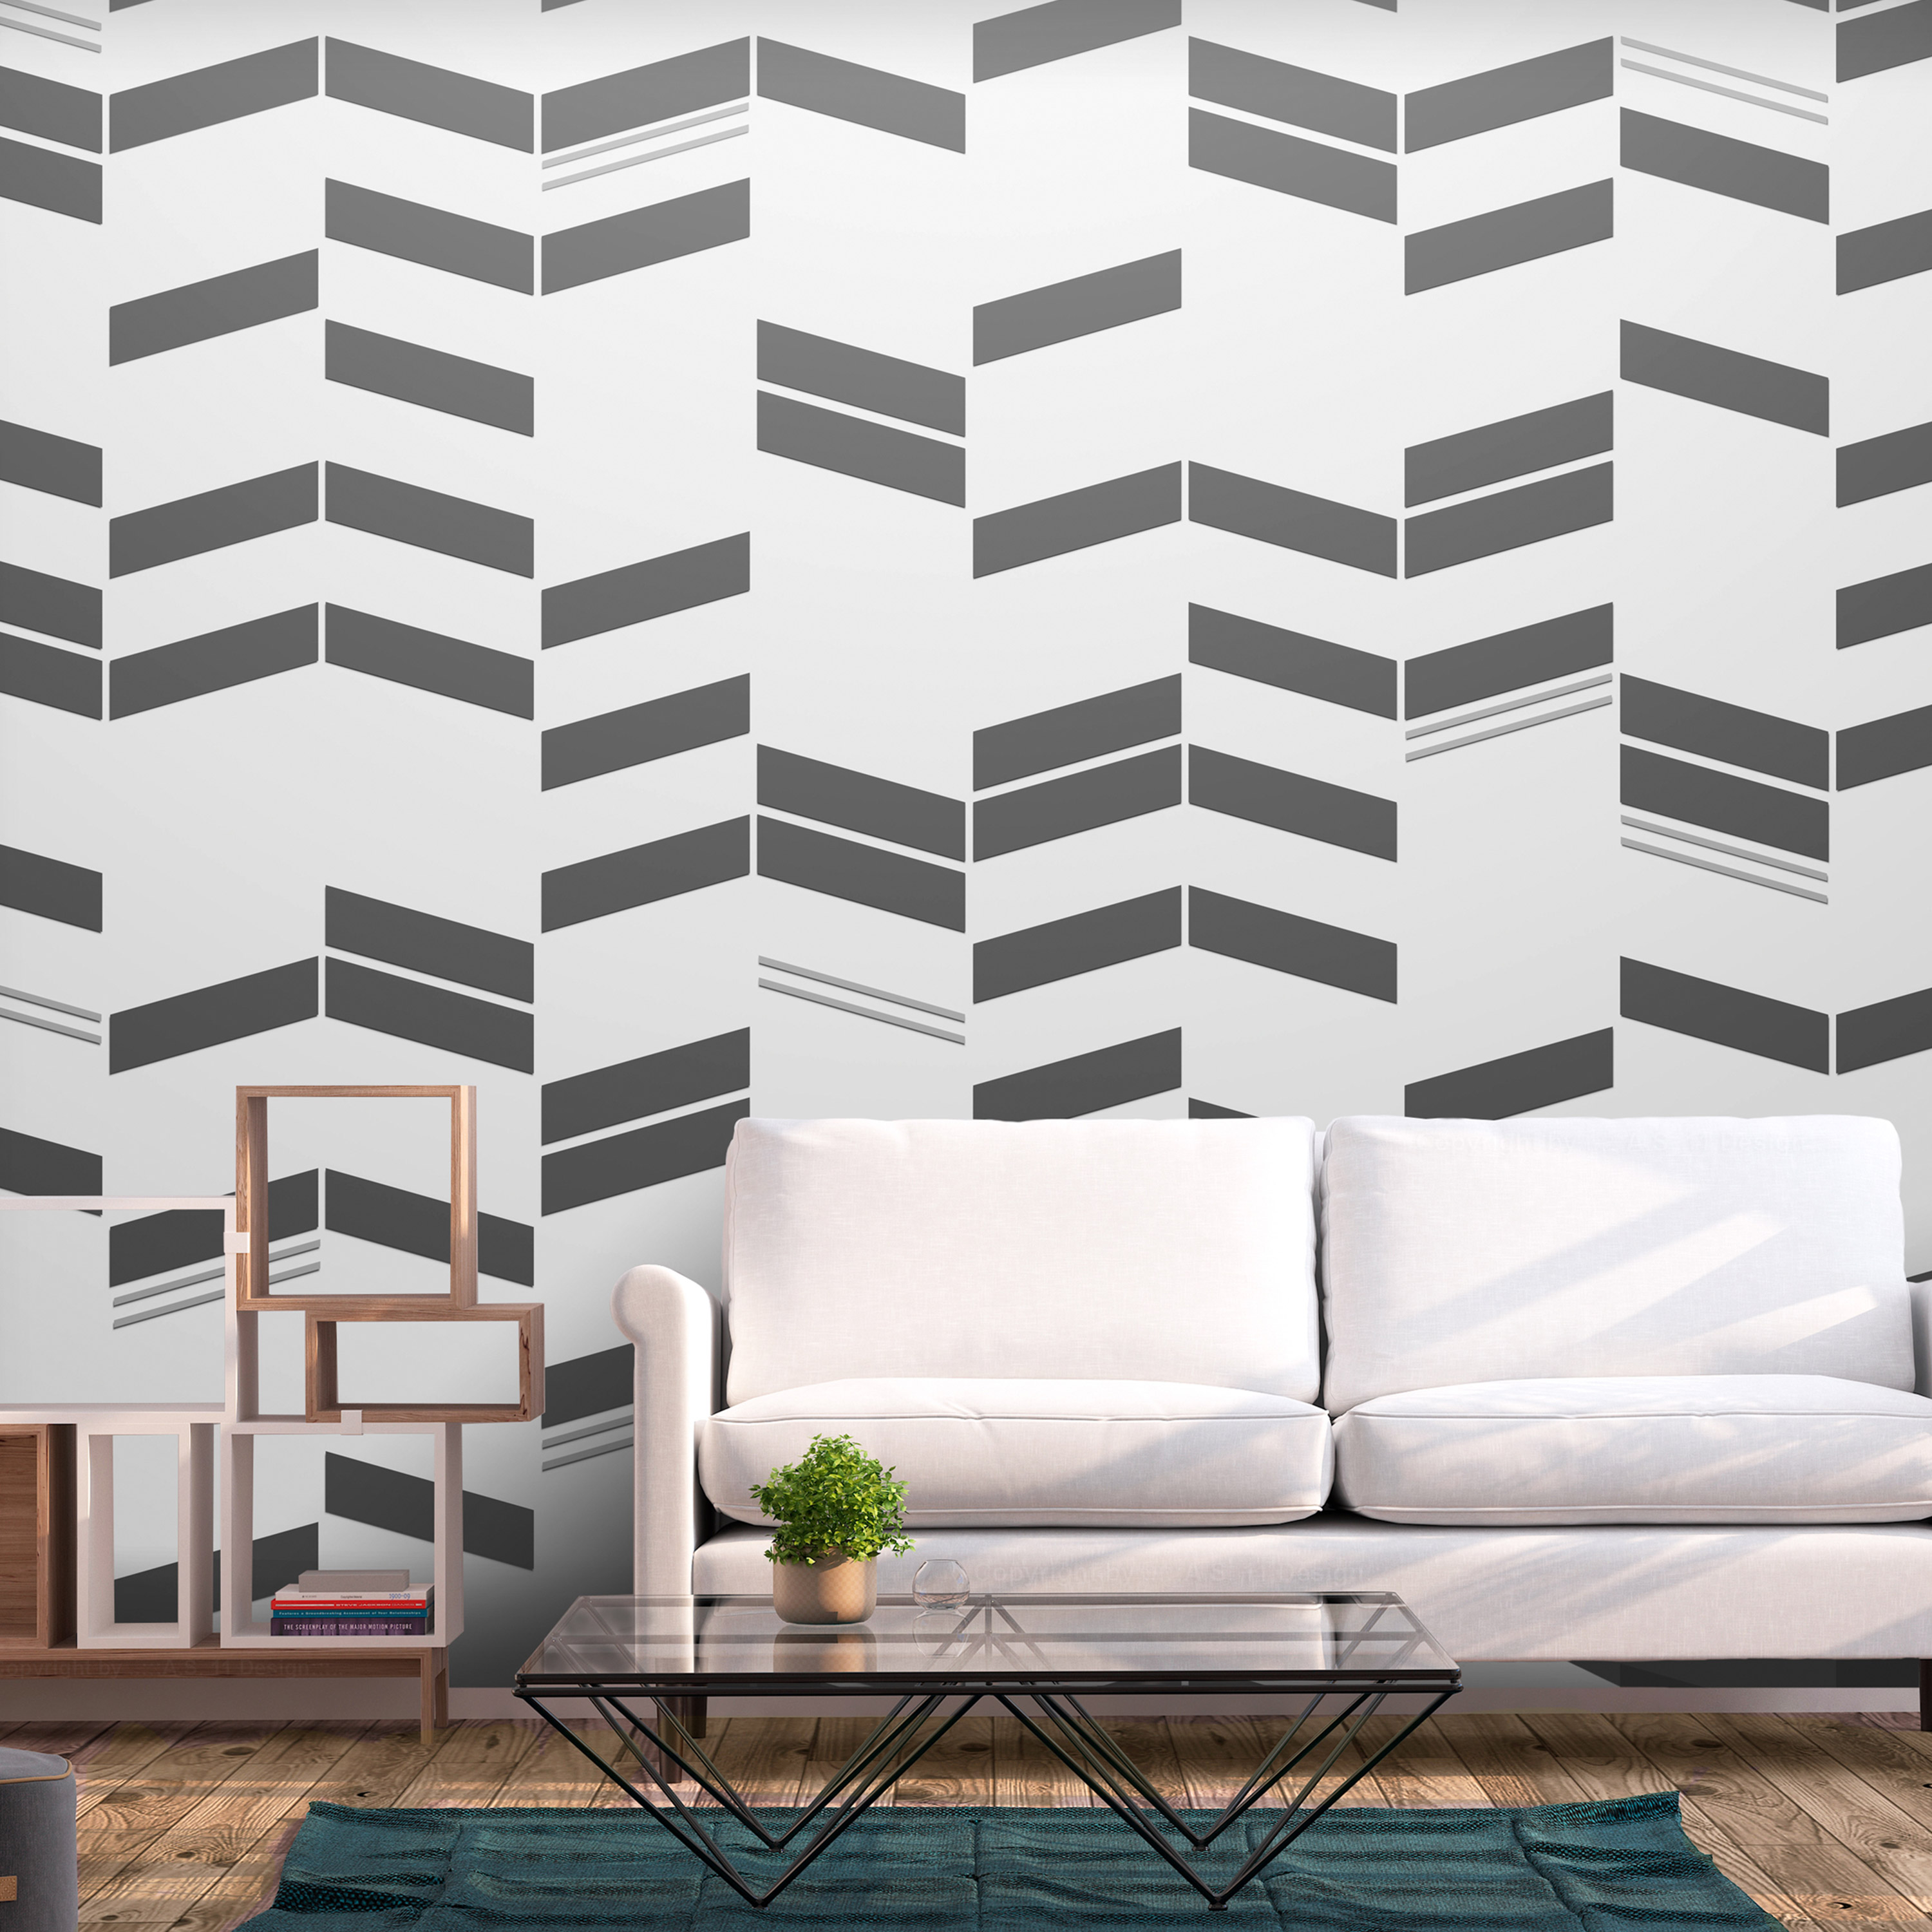 Self-adhesive Wallpaper - Simple Structures - 441x315